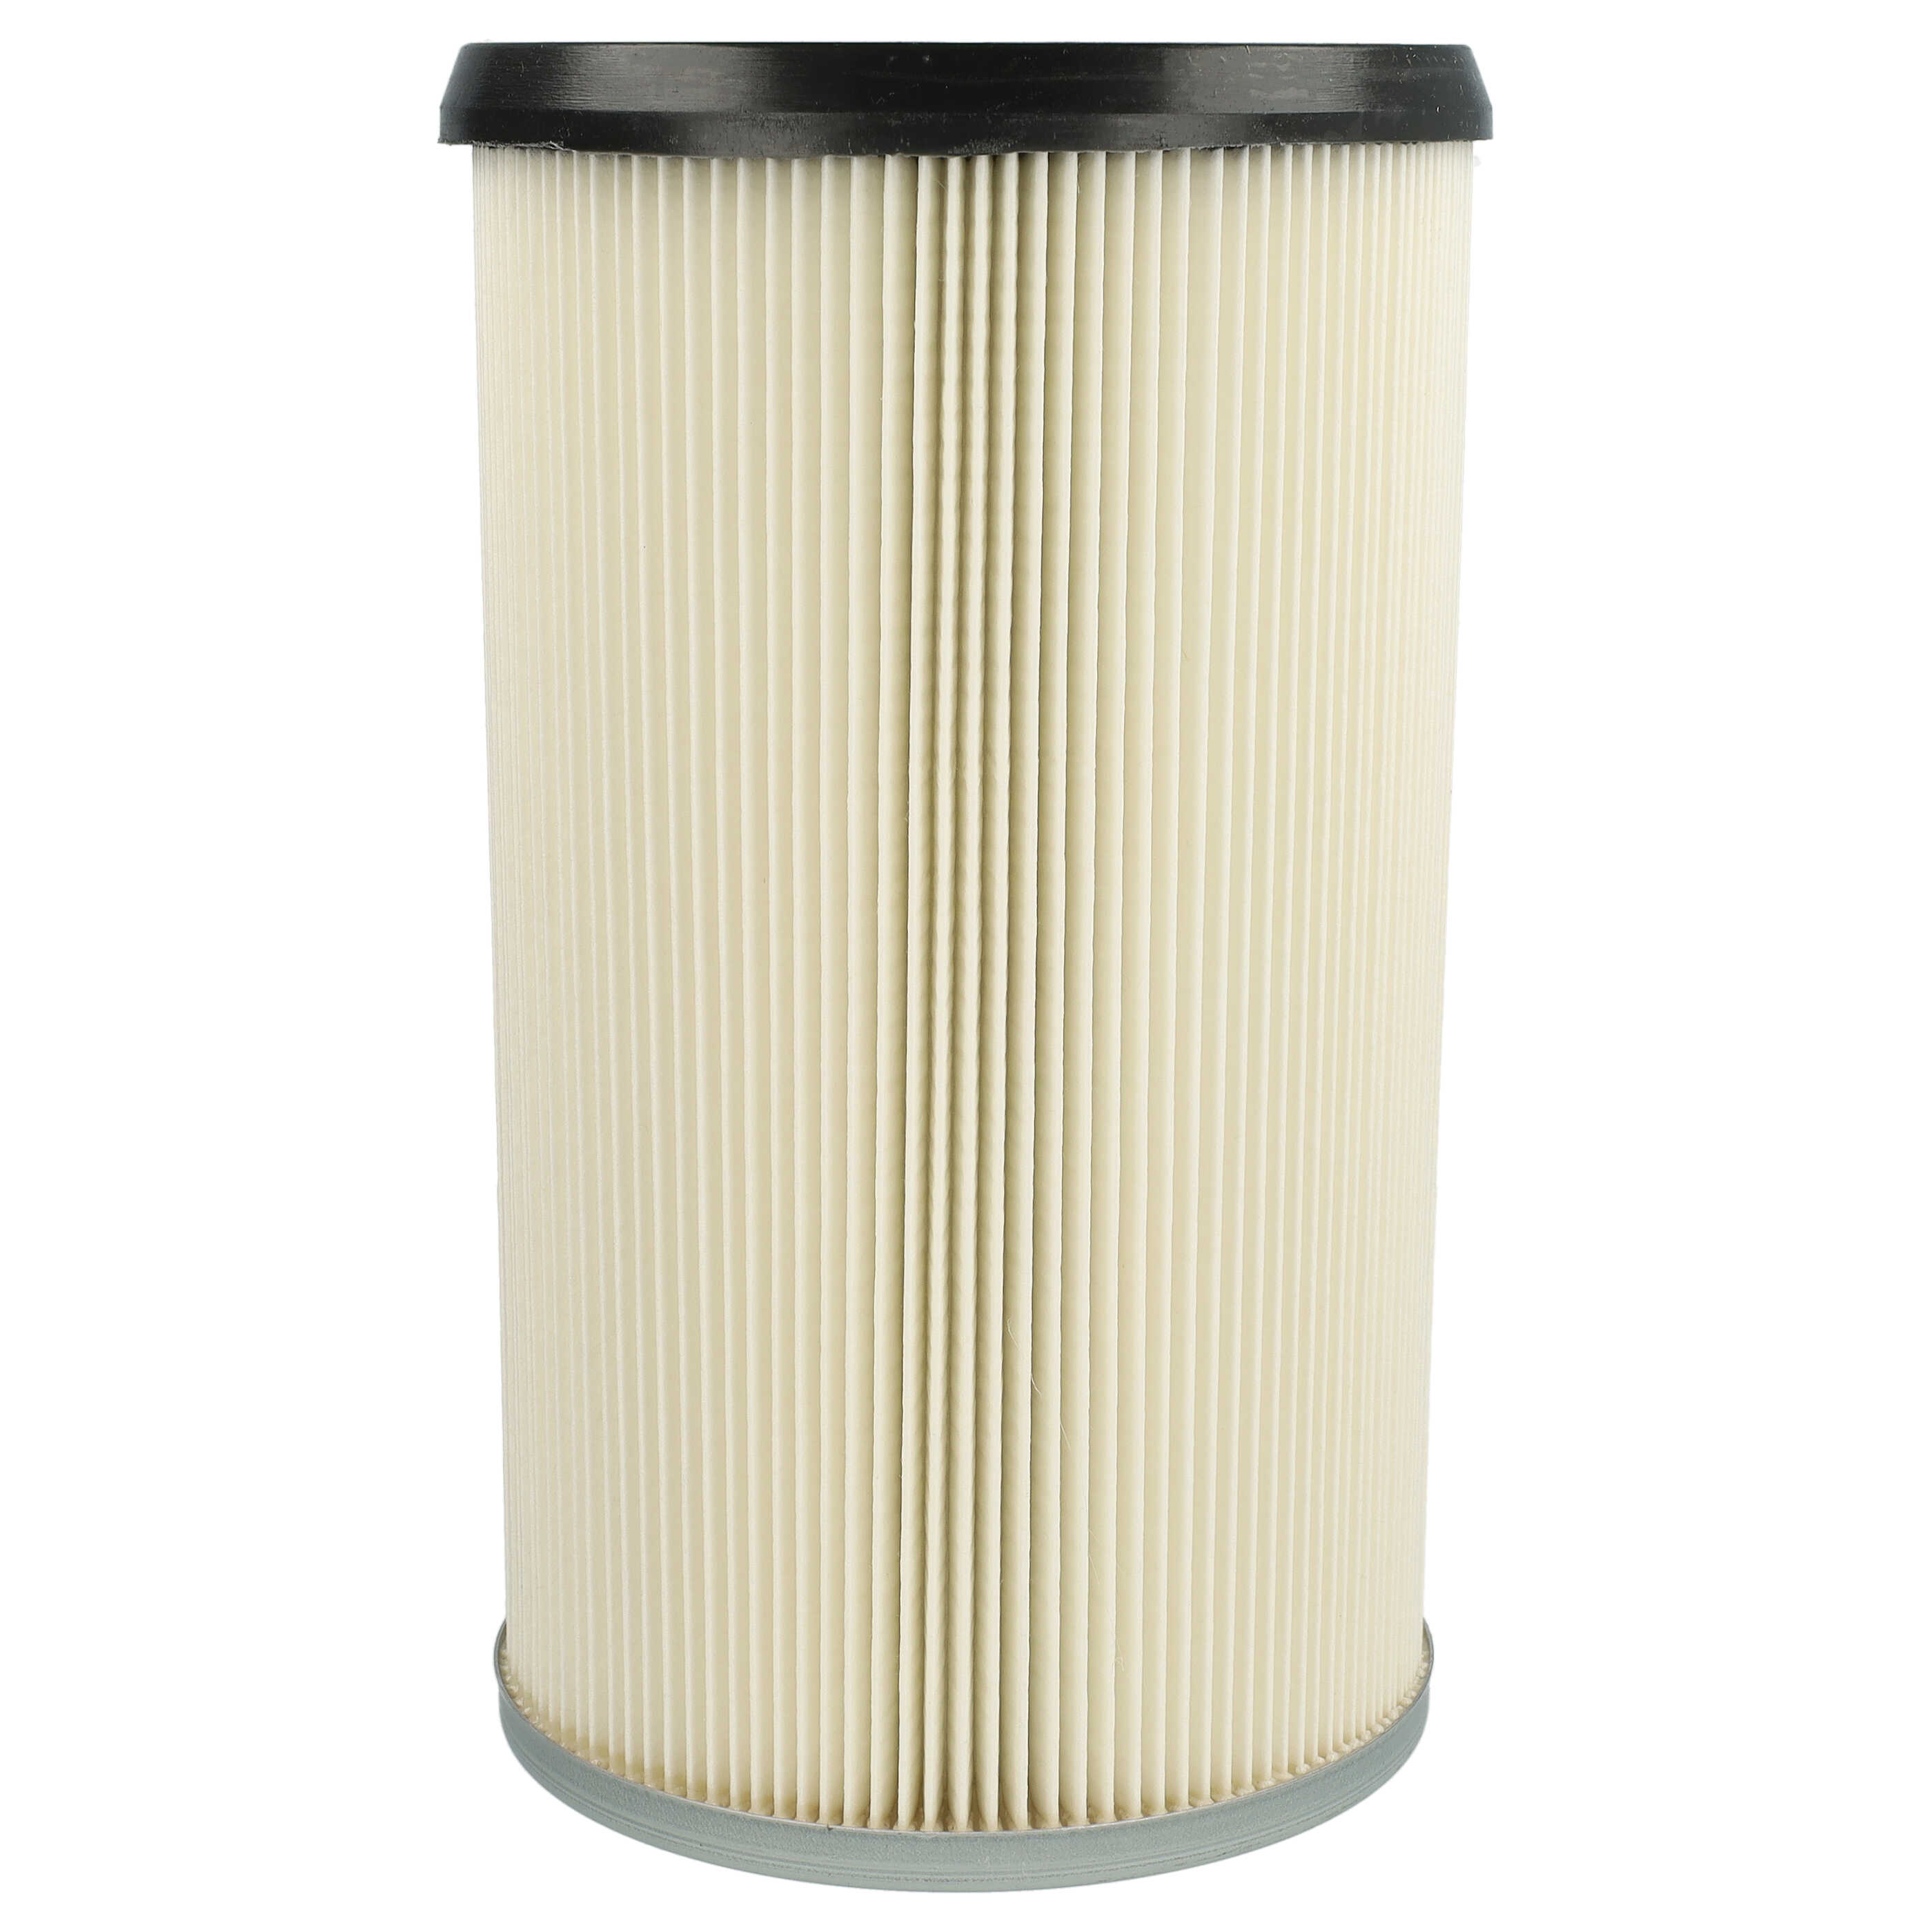 1x cartridge filter replaces Kärcher 57310070, 5.731-007.0 for Kärcher Vacuum Cleaner, white / silver / blue